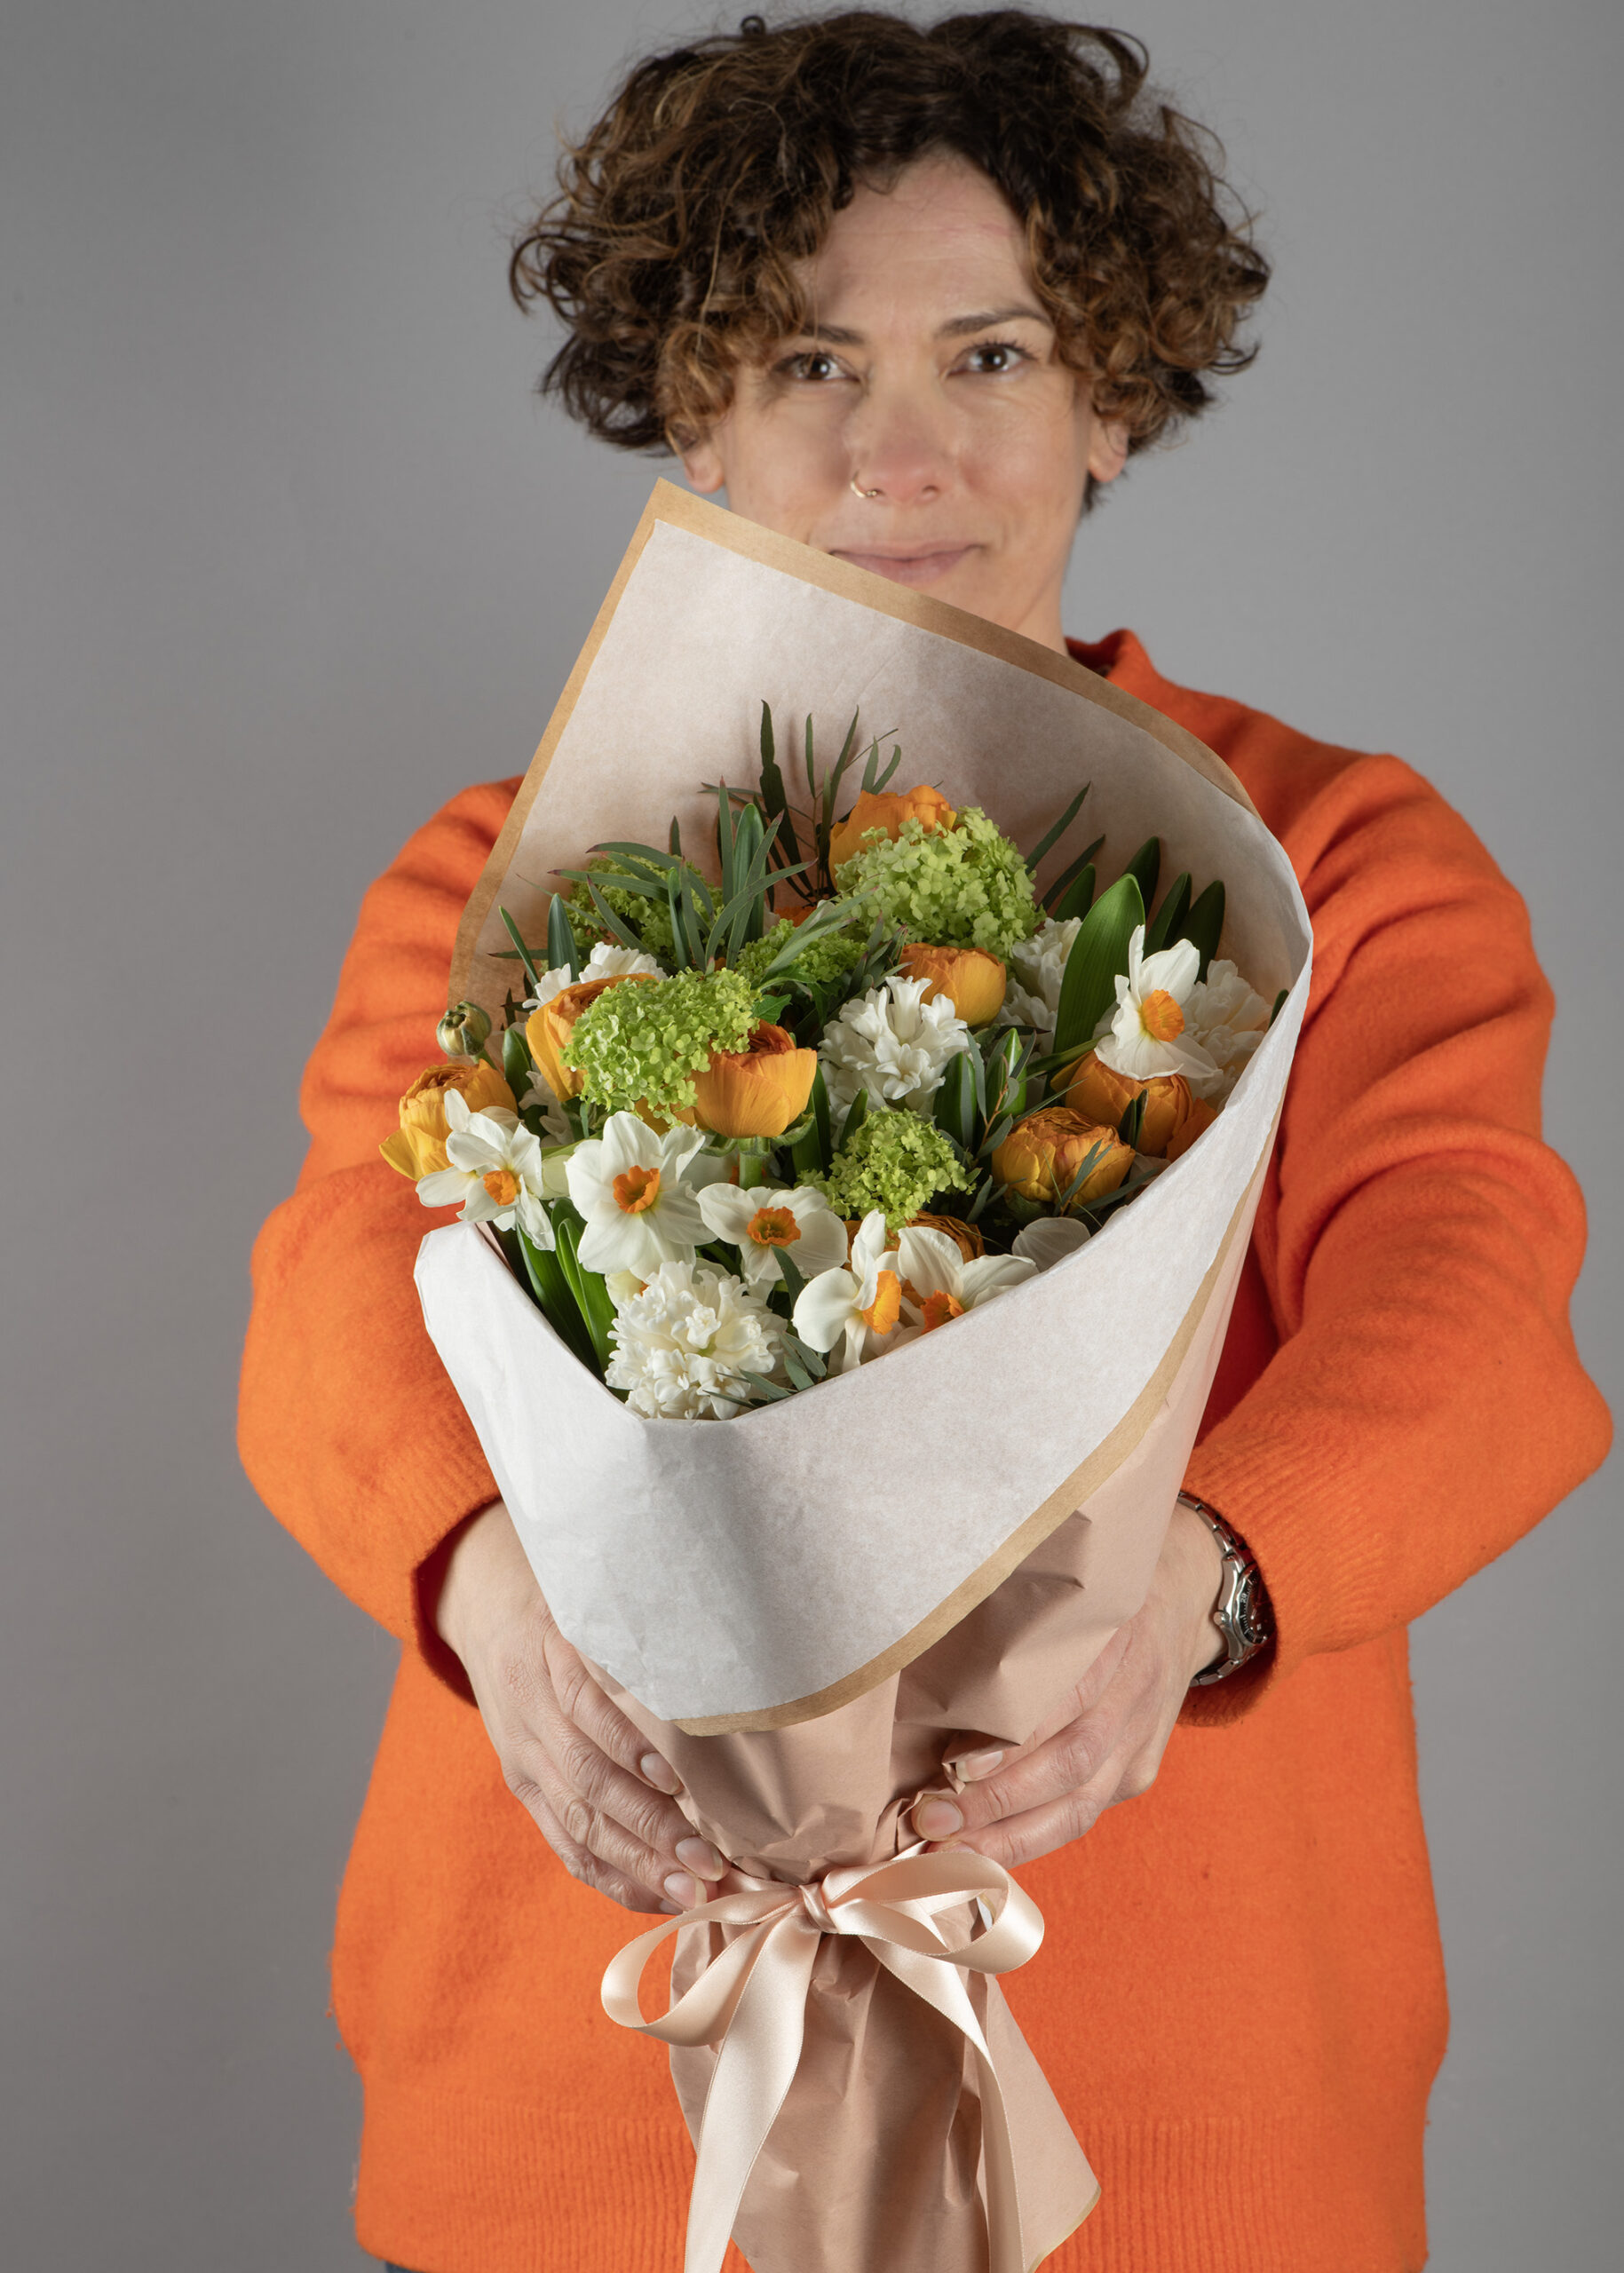 Georgina-holding-a-Spring-bunch-in-orange-creams-and-greens